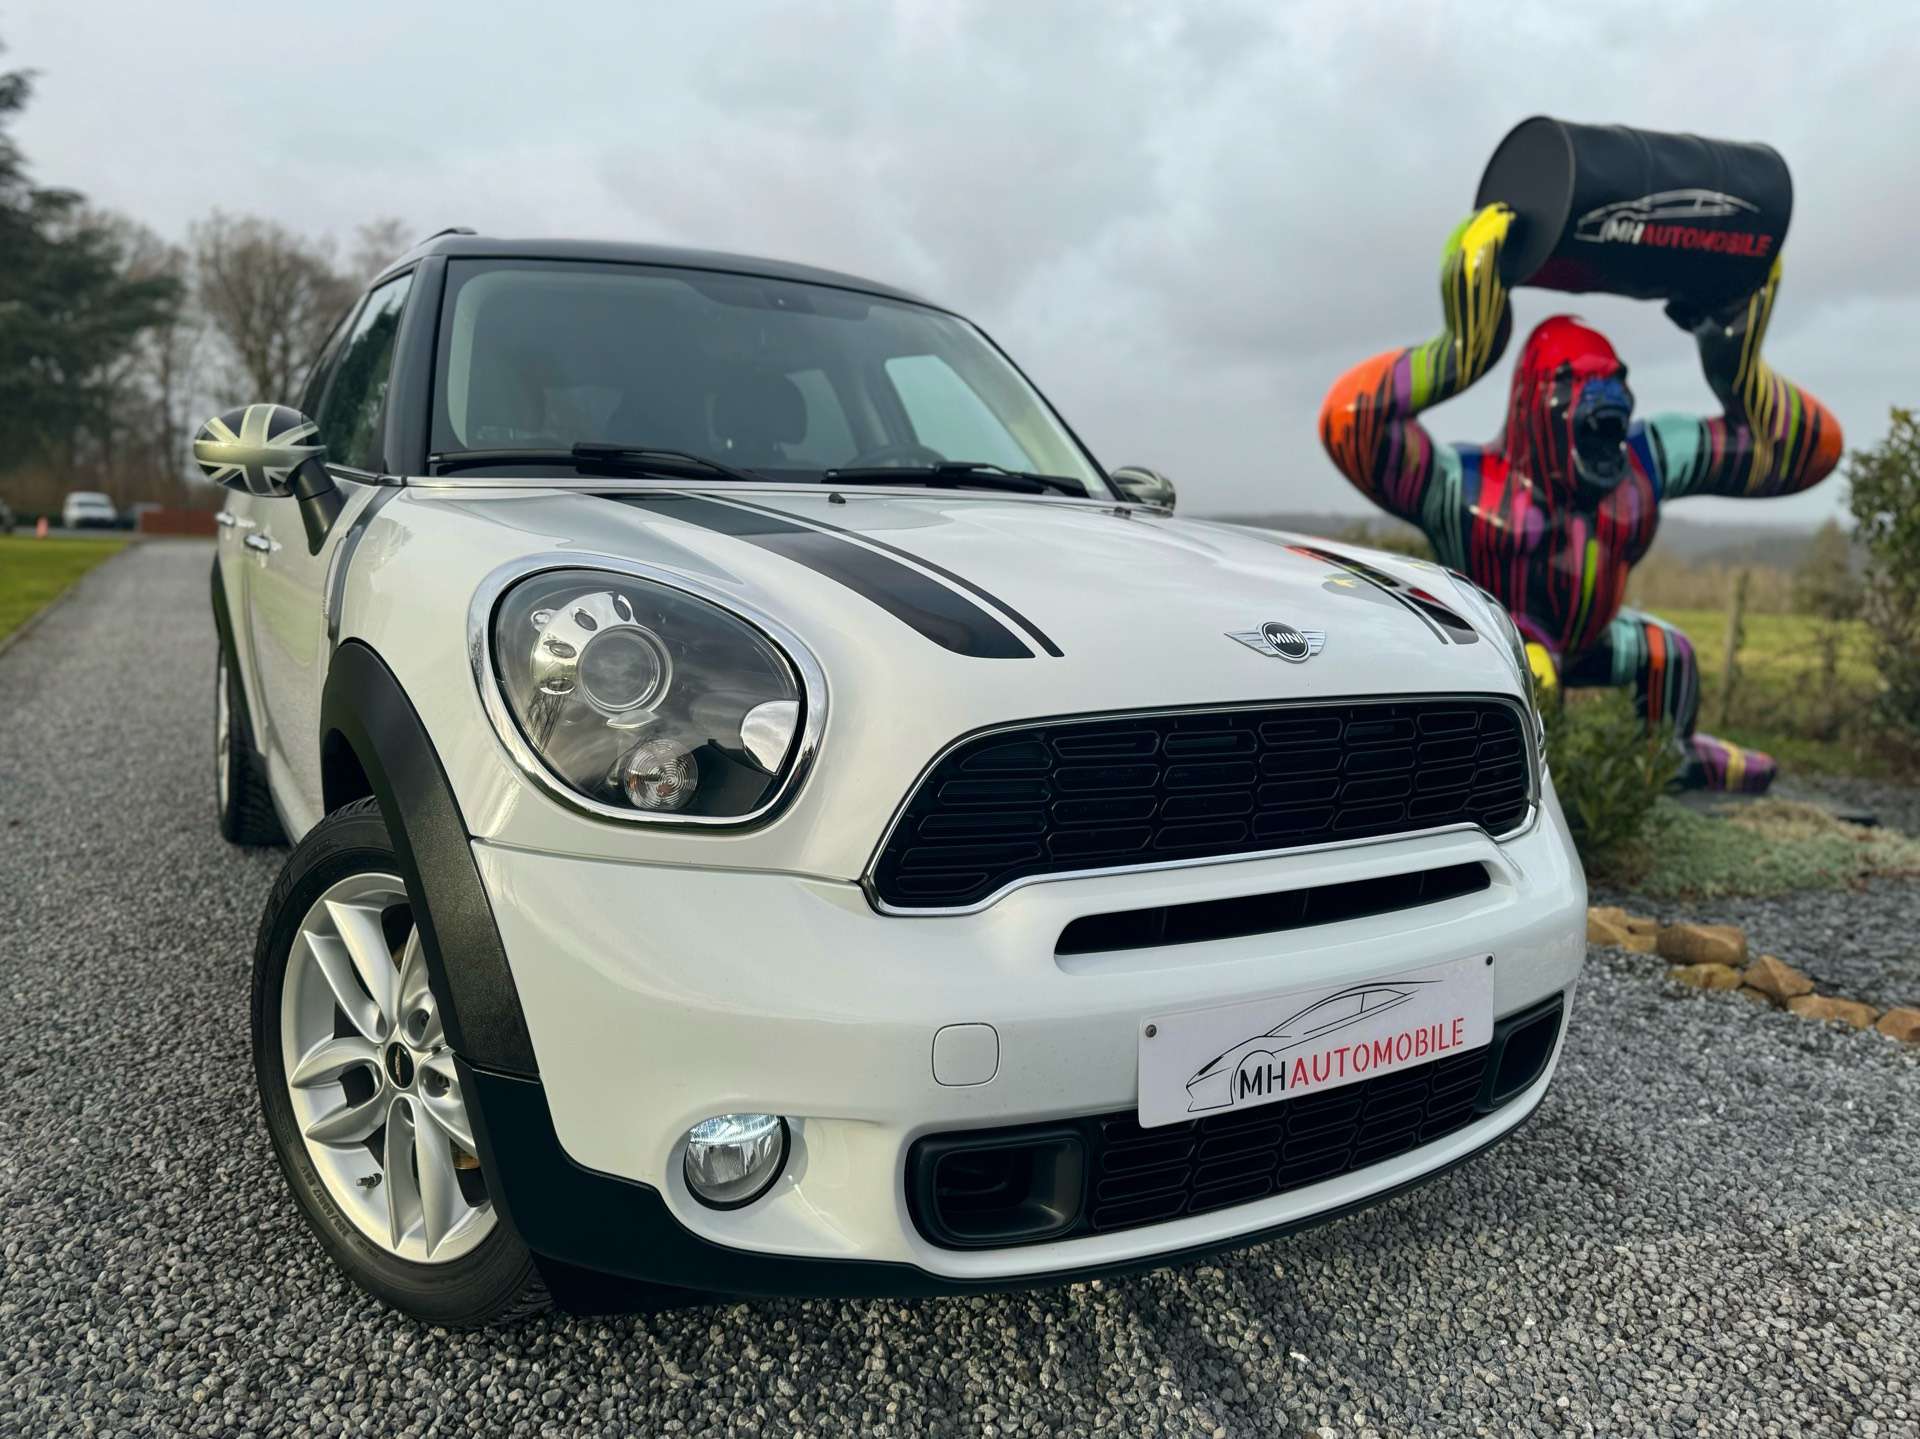 MINI Cooper SD Countryman Station wagon in White used in Assesse (Namur) for € 9,500.-